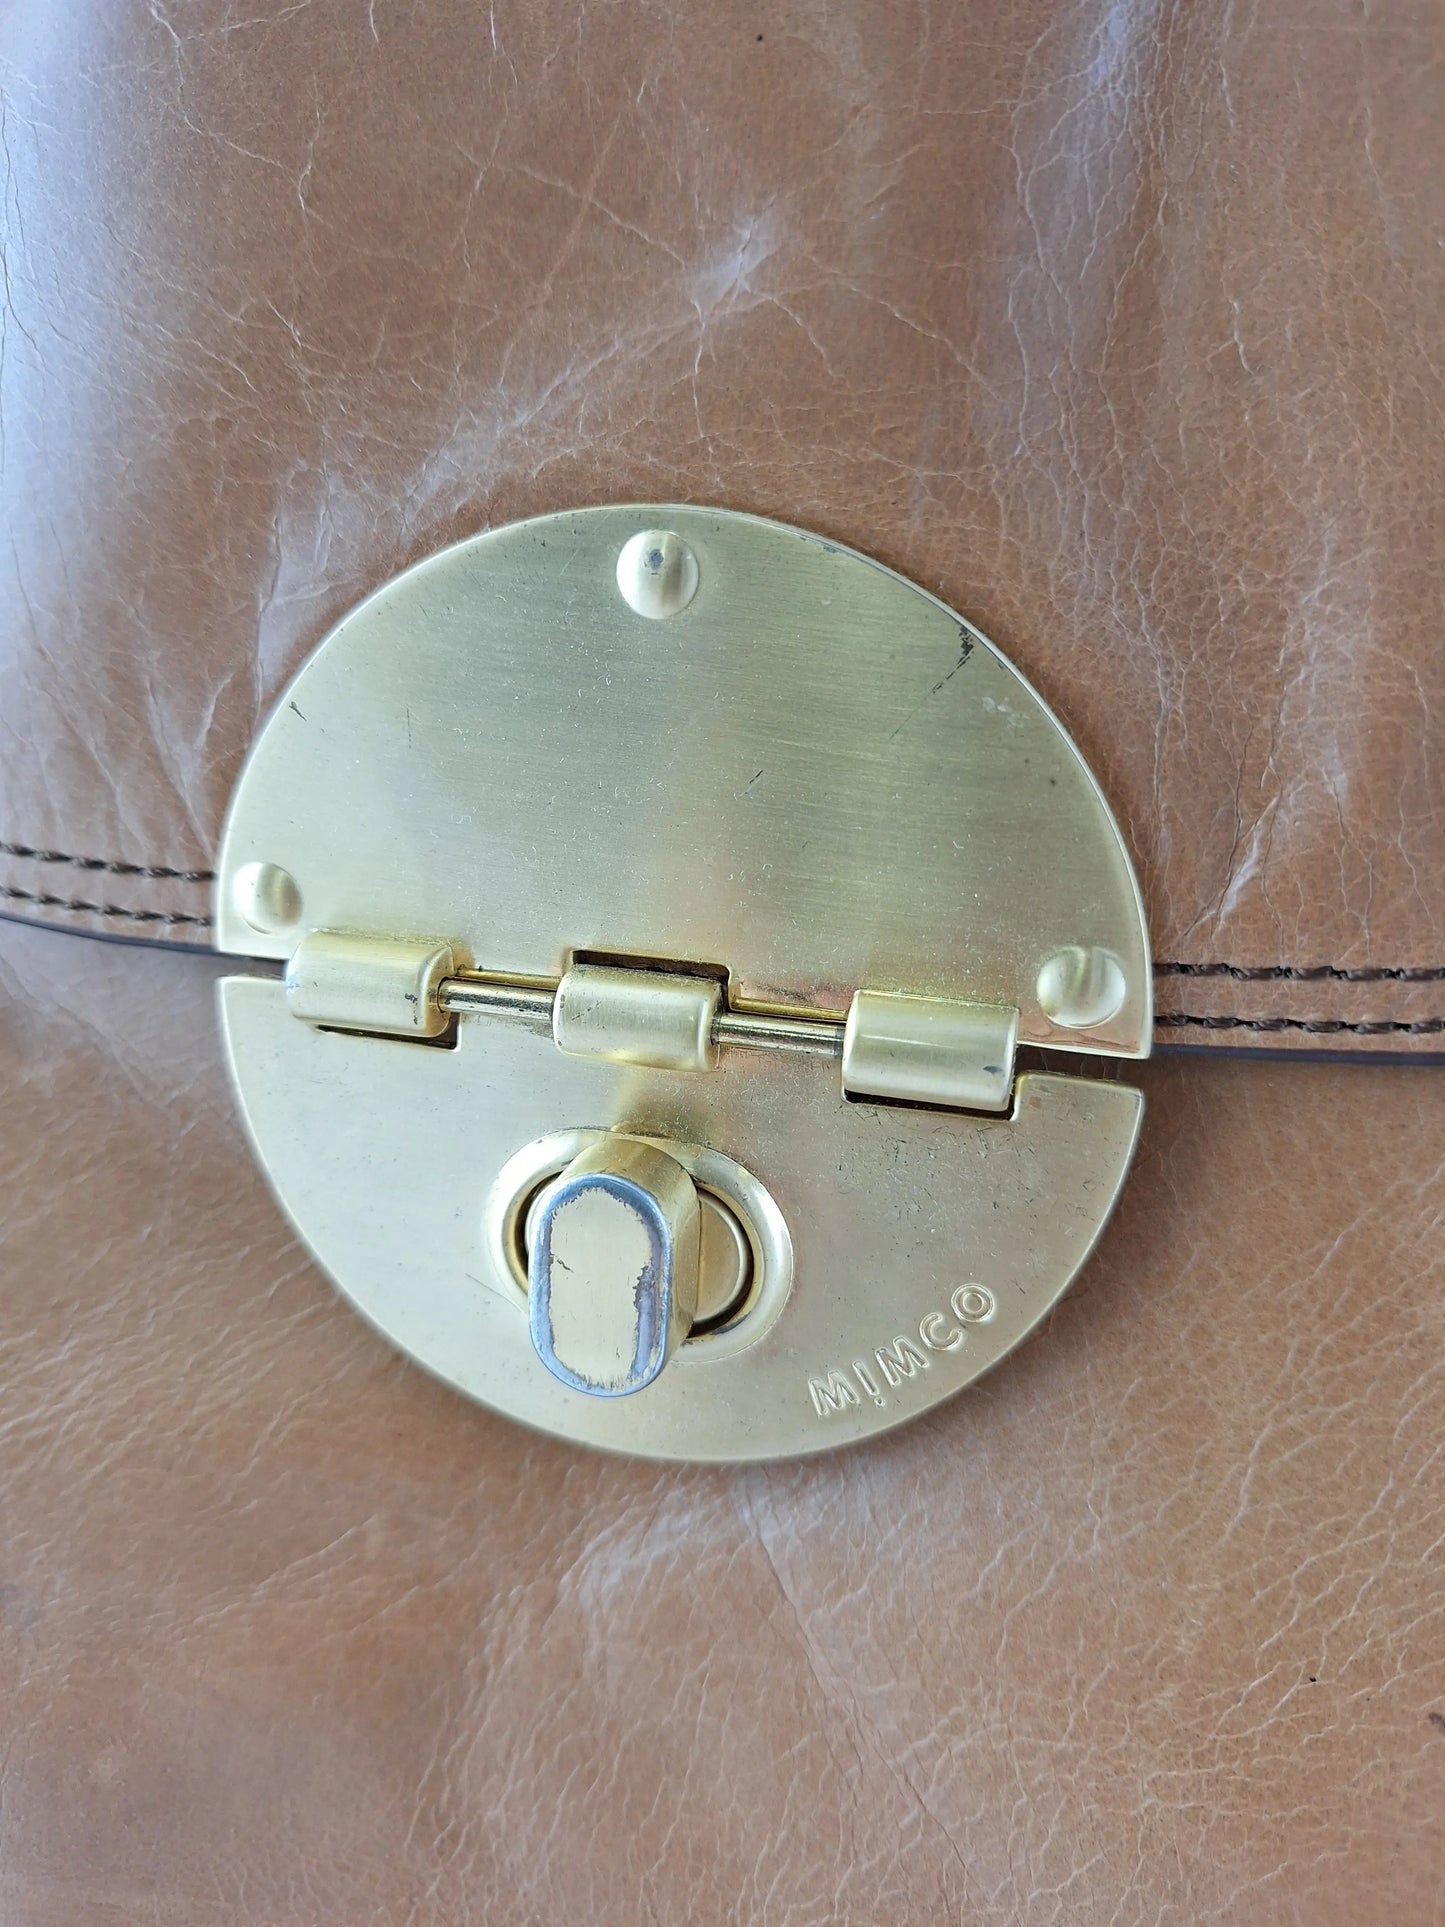 Mimco Latte Worker Satchel by SwapUp-Online Second Hand Store-Online Thrift Store